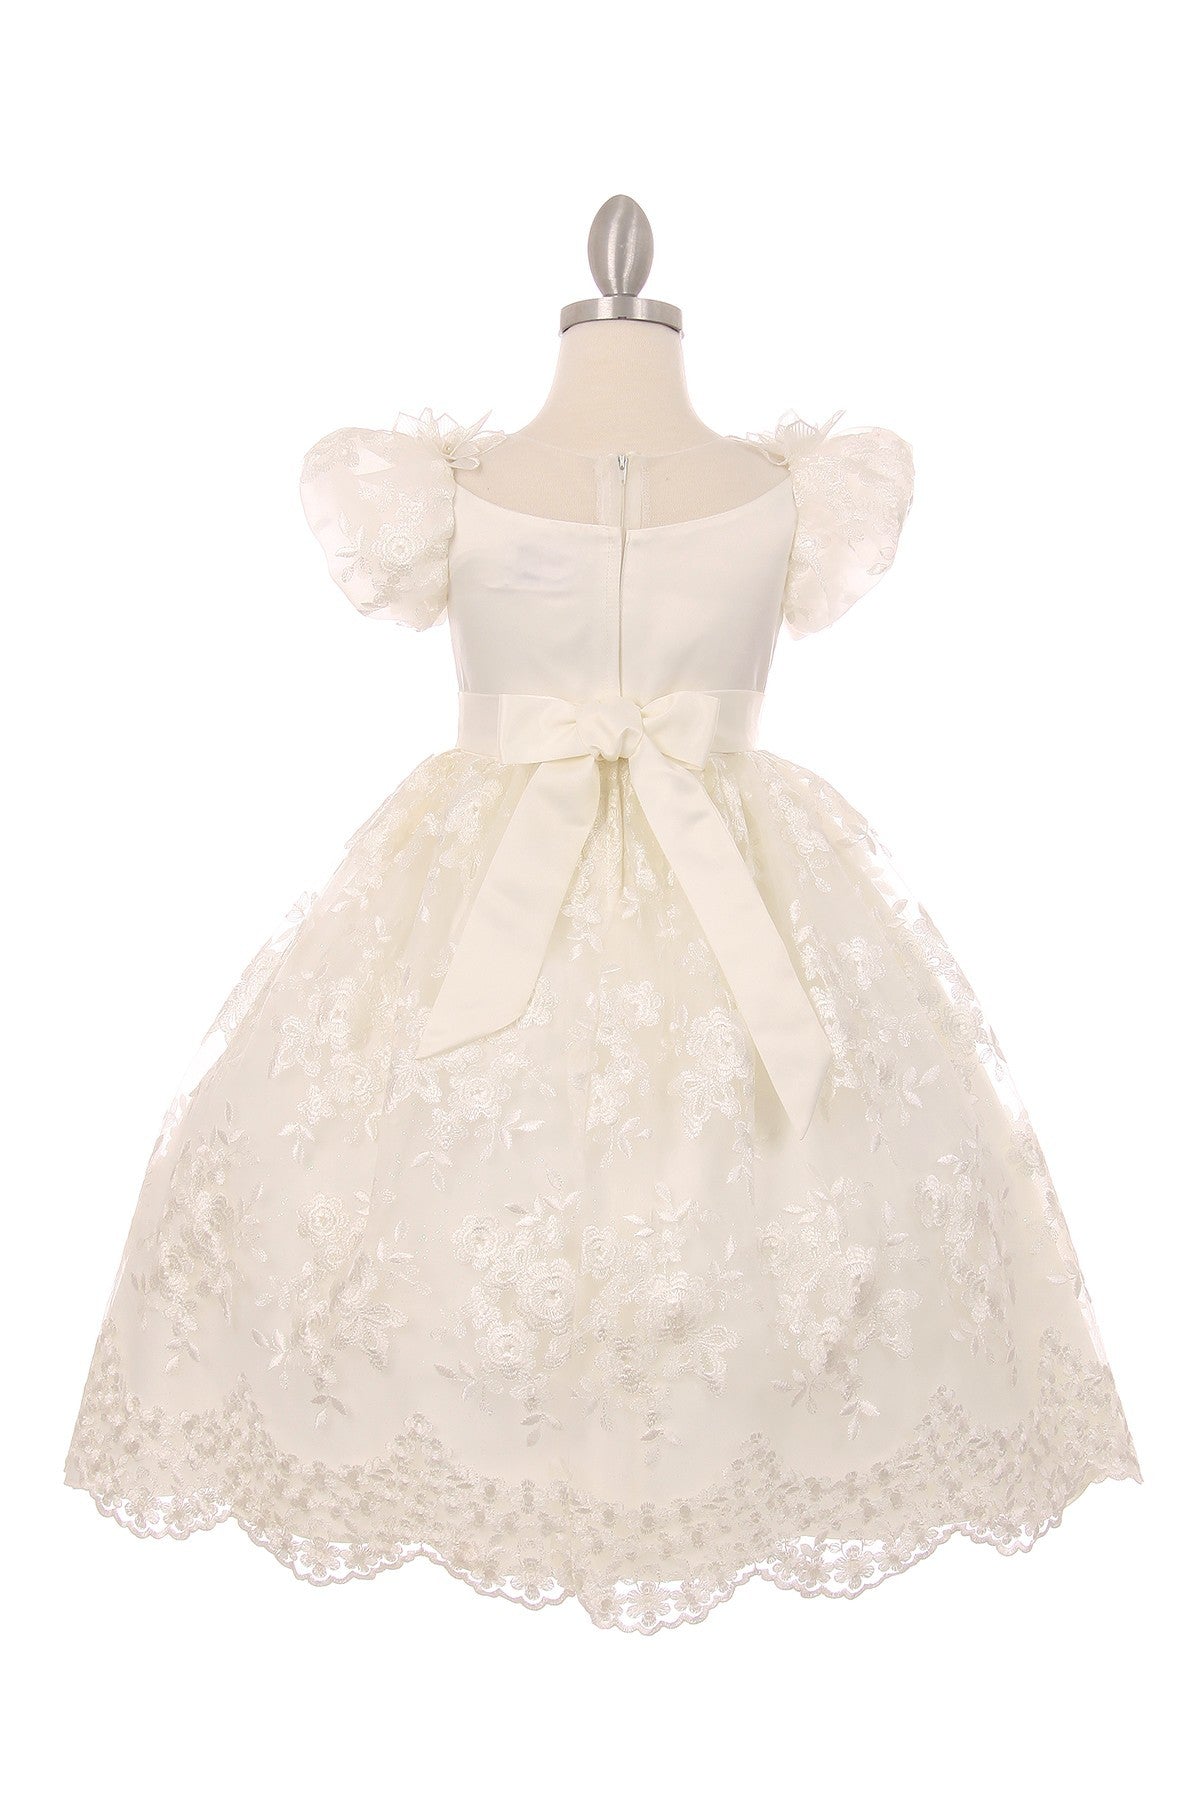 Puff Sleeve Lace Satin Girl Flower Girl Dress by Cinderella Couture USA AS2904